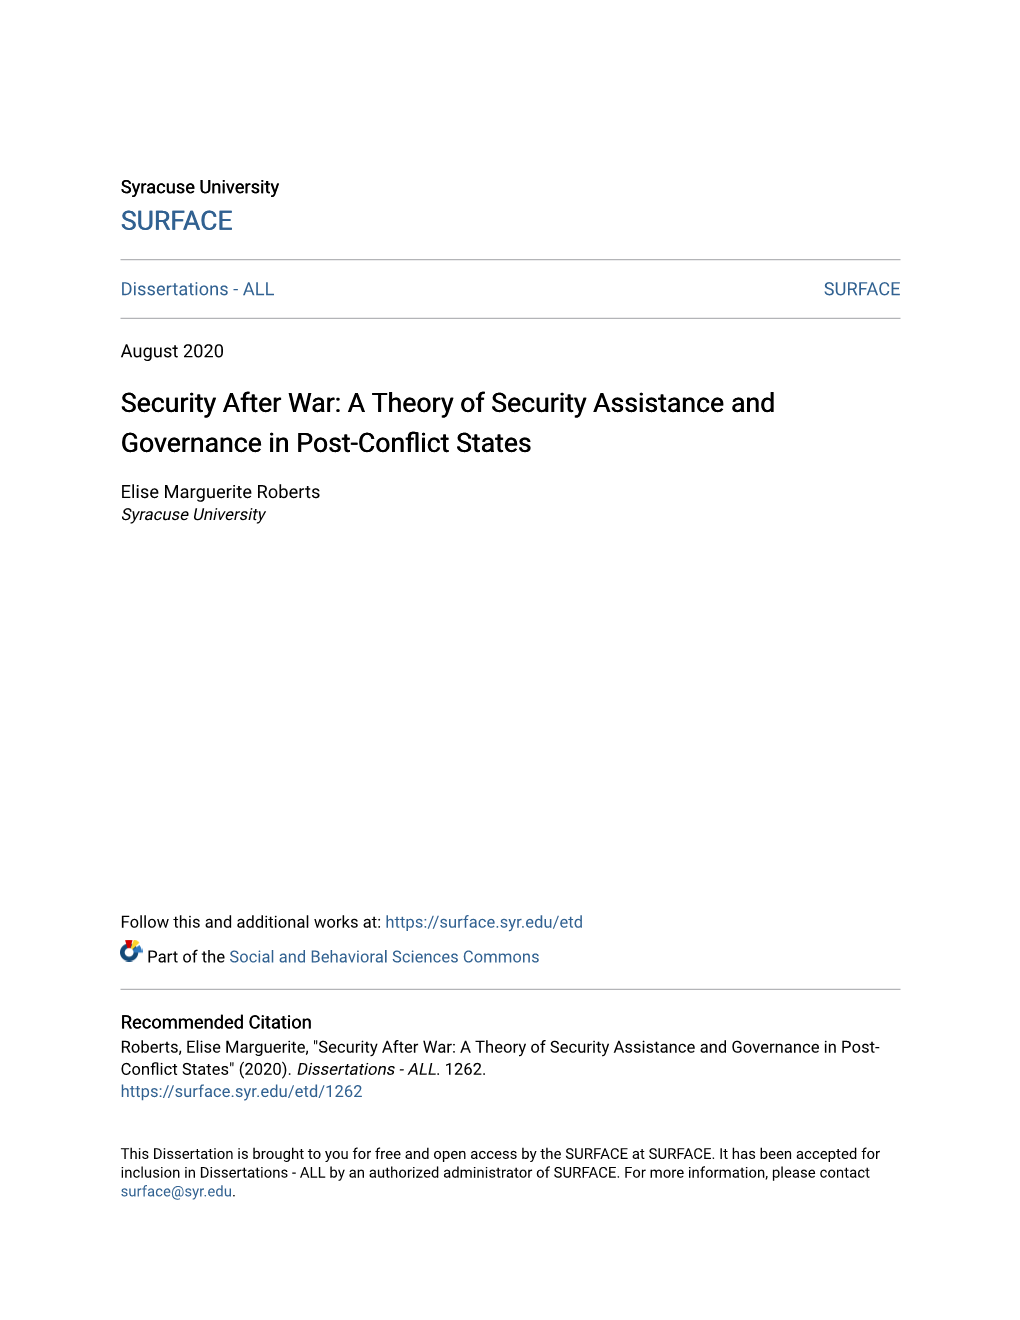 A Theory of Security Assistance and Governance in Post-Conflict States